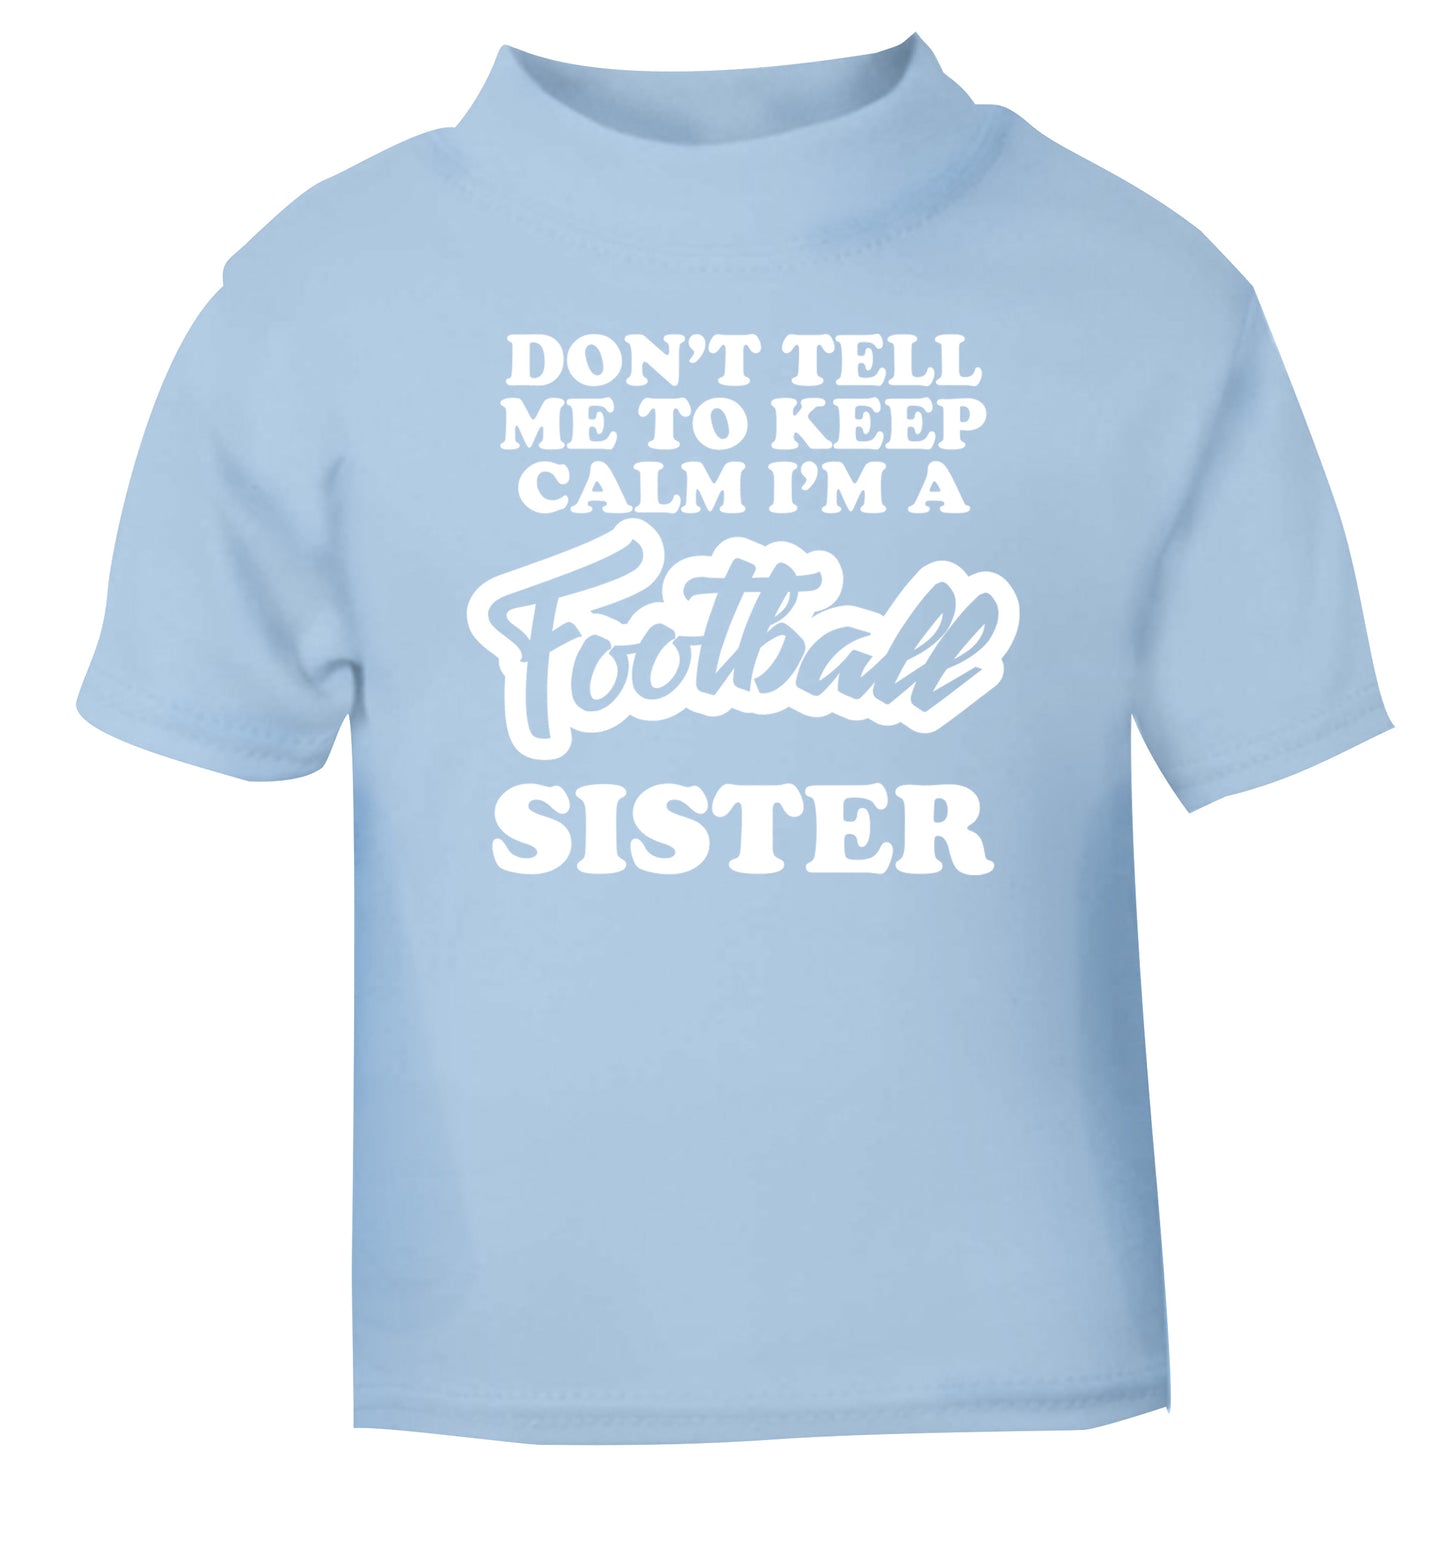 Don't tell me to keep calm I'm a football sister light blue Baby Toddler Tshirt 2 Years